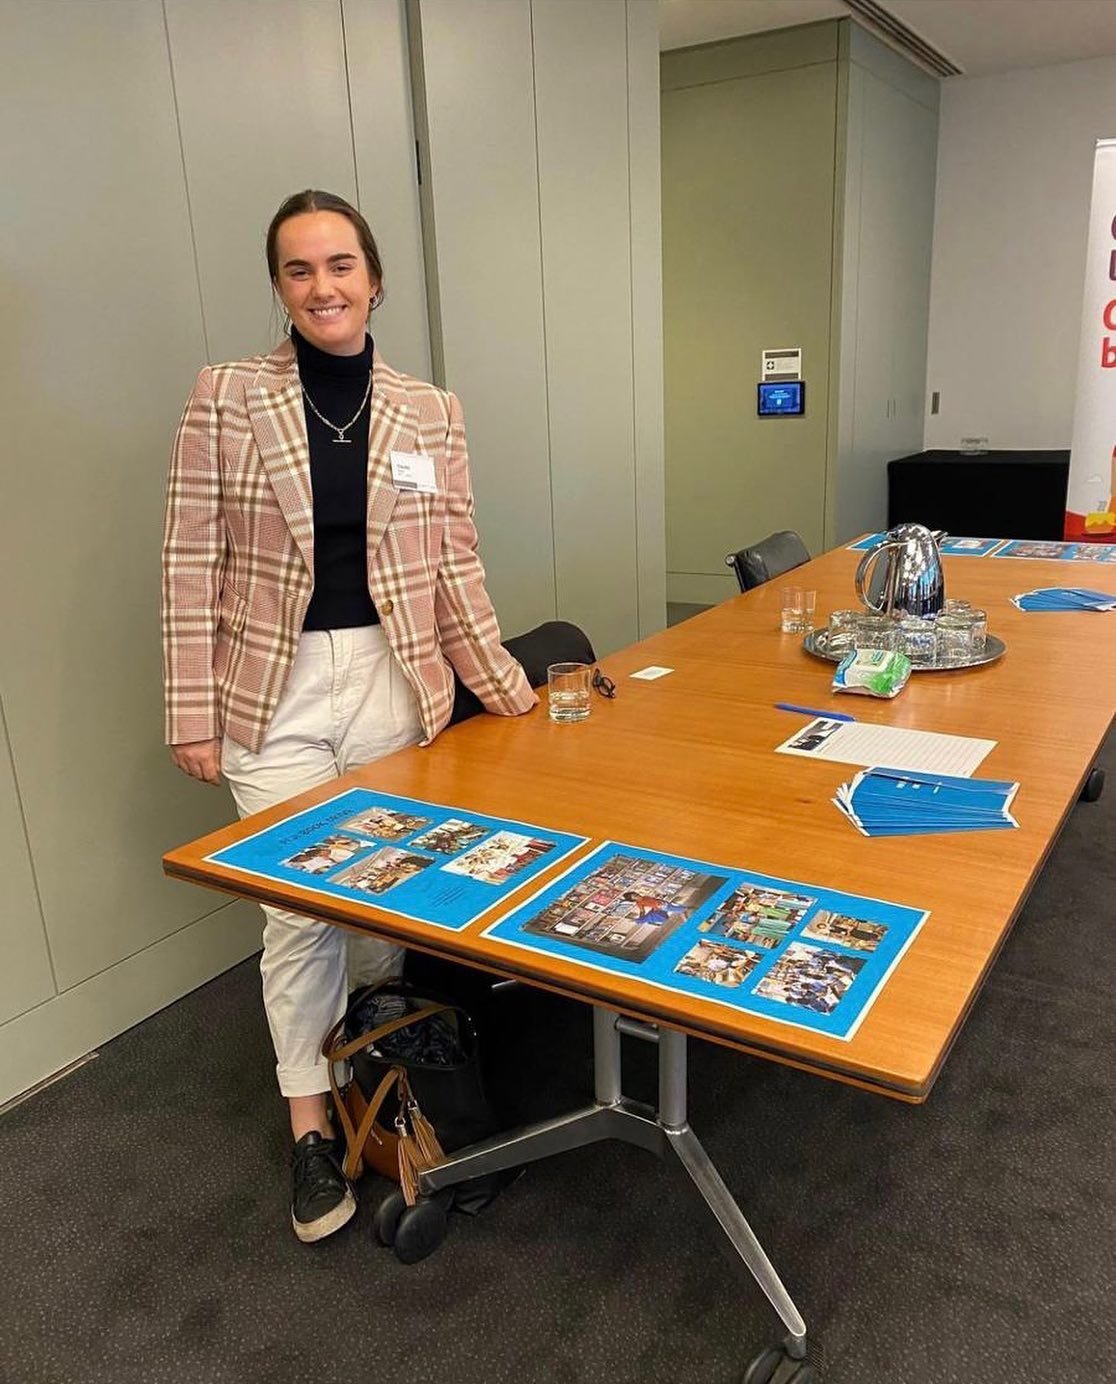 They say it takes a village to raise a child - but the saying definitely applies to not-for-profits too! 

Since 2016, one of our proud members of Fiji Book Drive&rsquo;s village has been @claytonutz. 

As a law firm, Clayton Utz has assisted us with